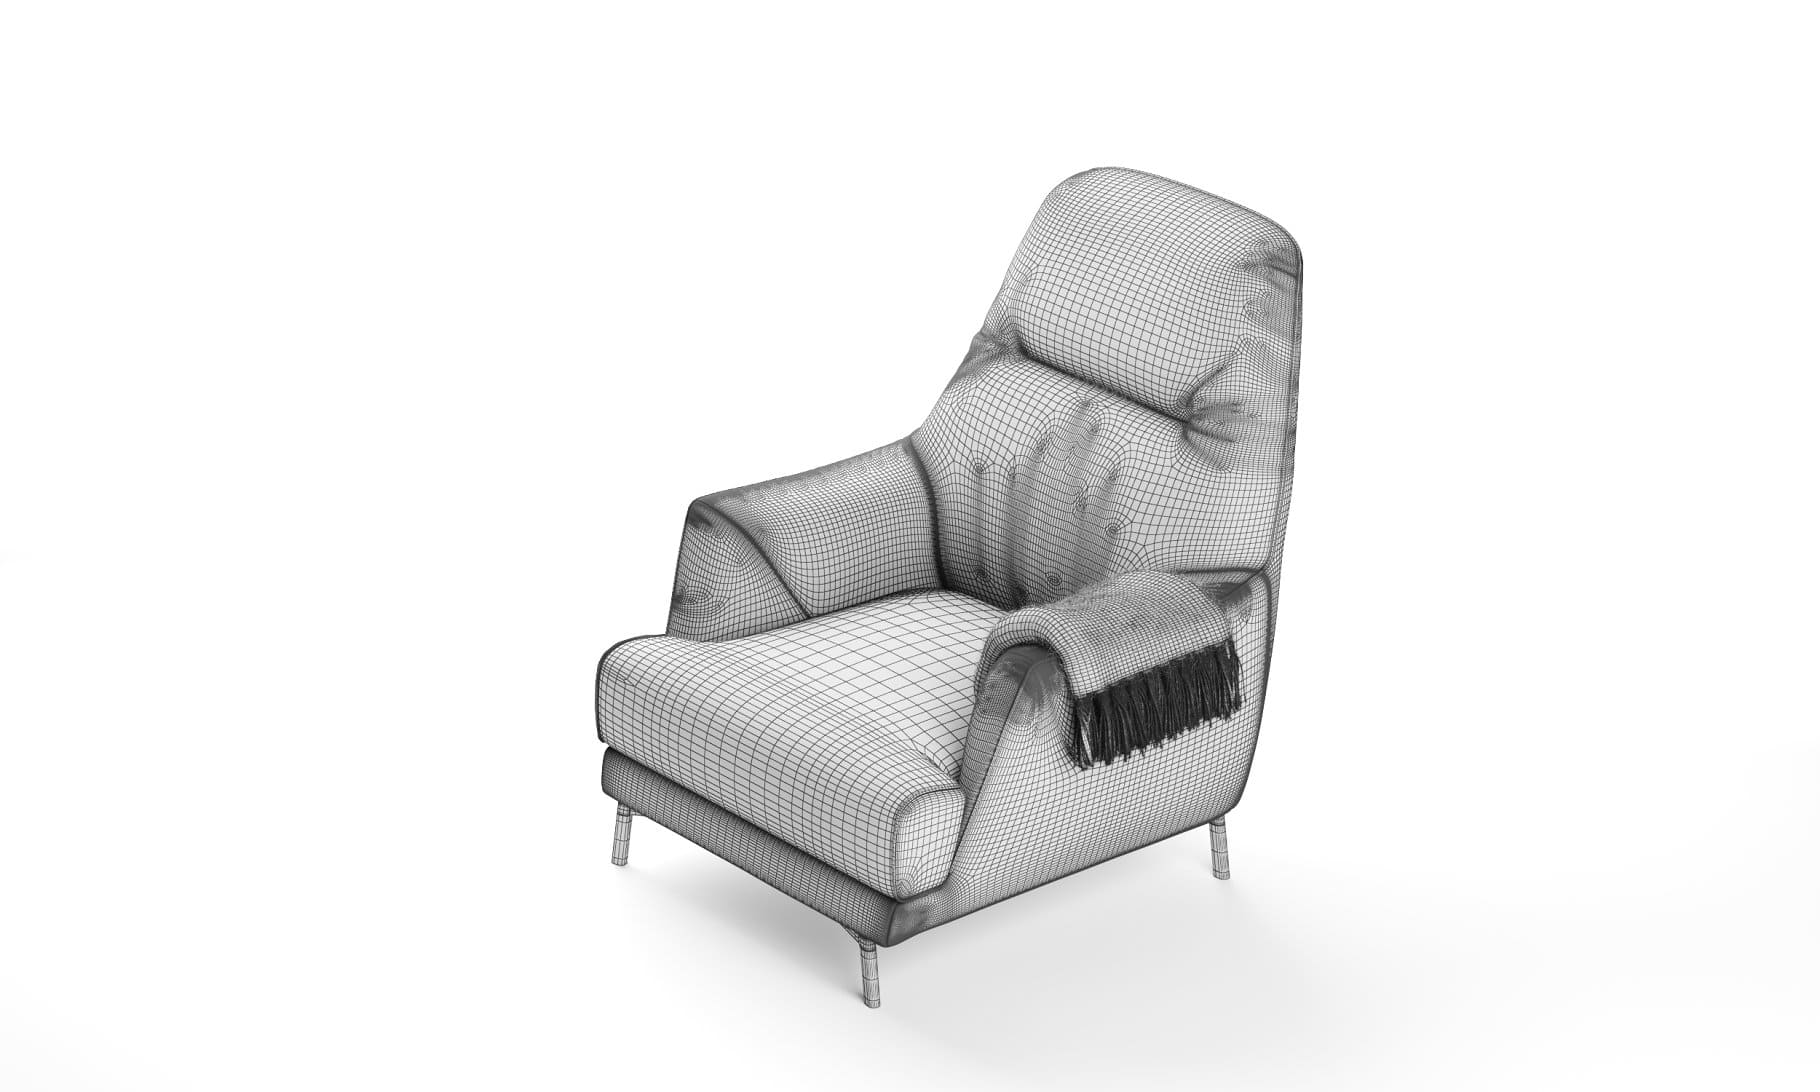 3D model of a chair with small legs.